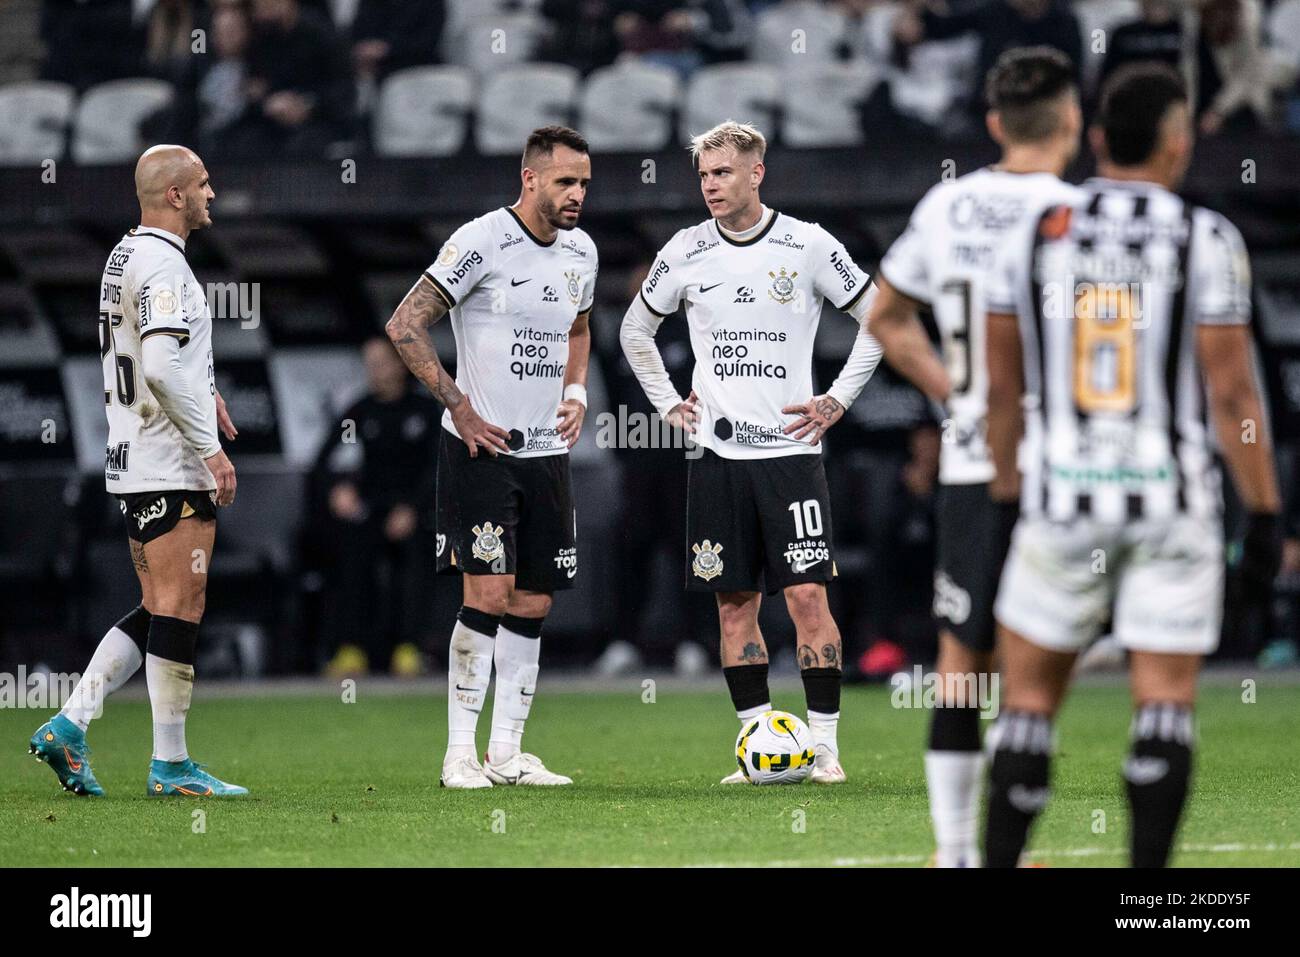 SÃO PAULO, SP - 05.11.2022: CORINTHIANS X CEARÁ - Roger Guedes and Renato Augusto during the game between Corinthians and Ceará held at Neo Química Arena in São Paulo, SP. The match is valid for the 36th Round of the Brasileirão. (Photo: Marco Galvão/Fotoarena) Stock Photo